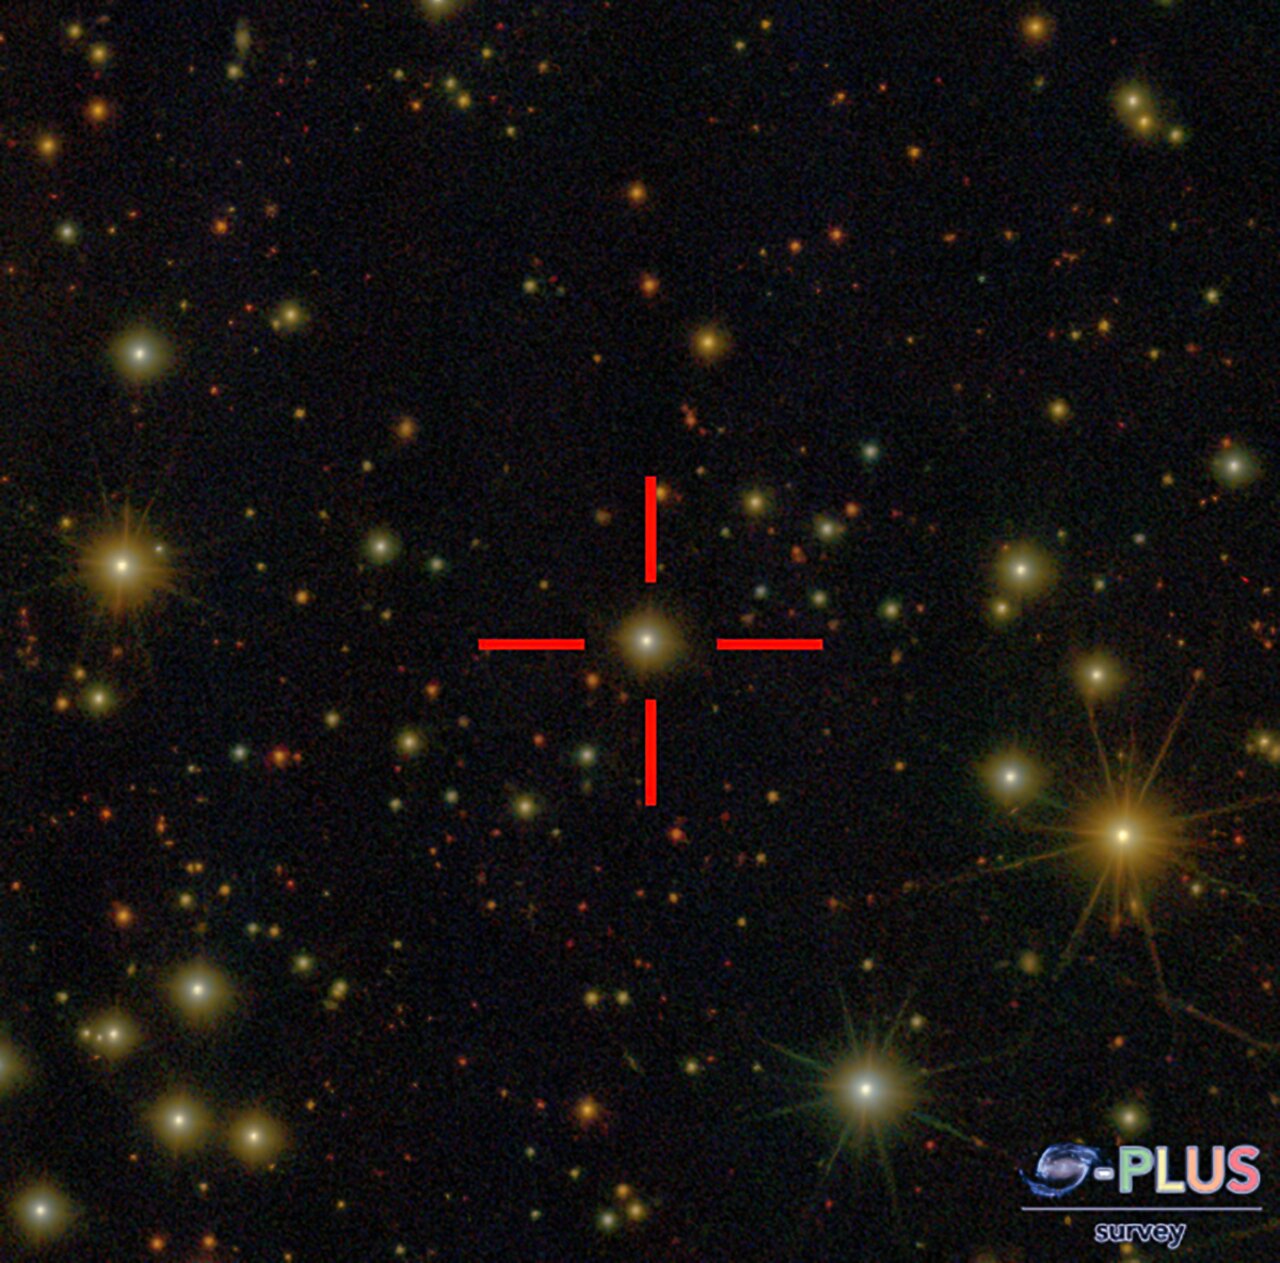 One of the oldest known stars in the Universe, SPLUS J2104-0049